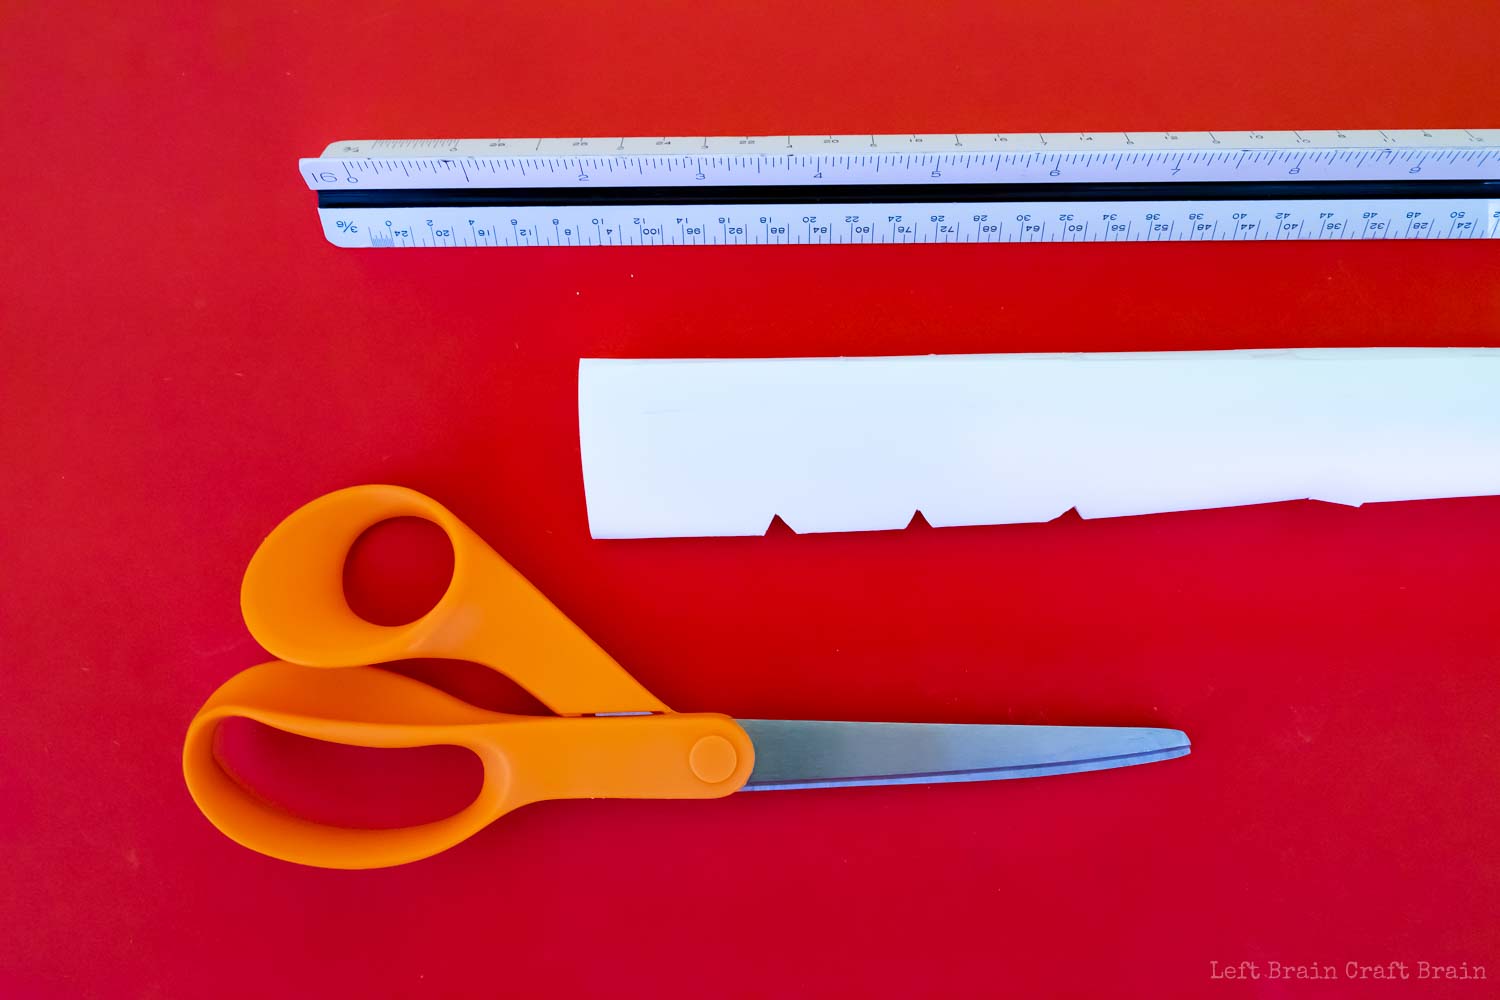 paper flute with triangle keys cut out, orange scissors, and ruler on red background